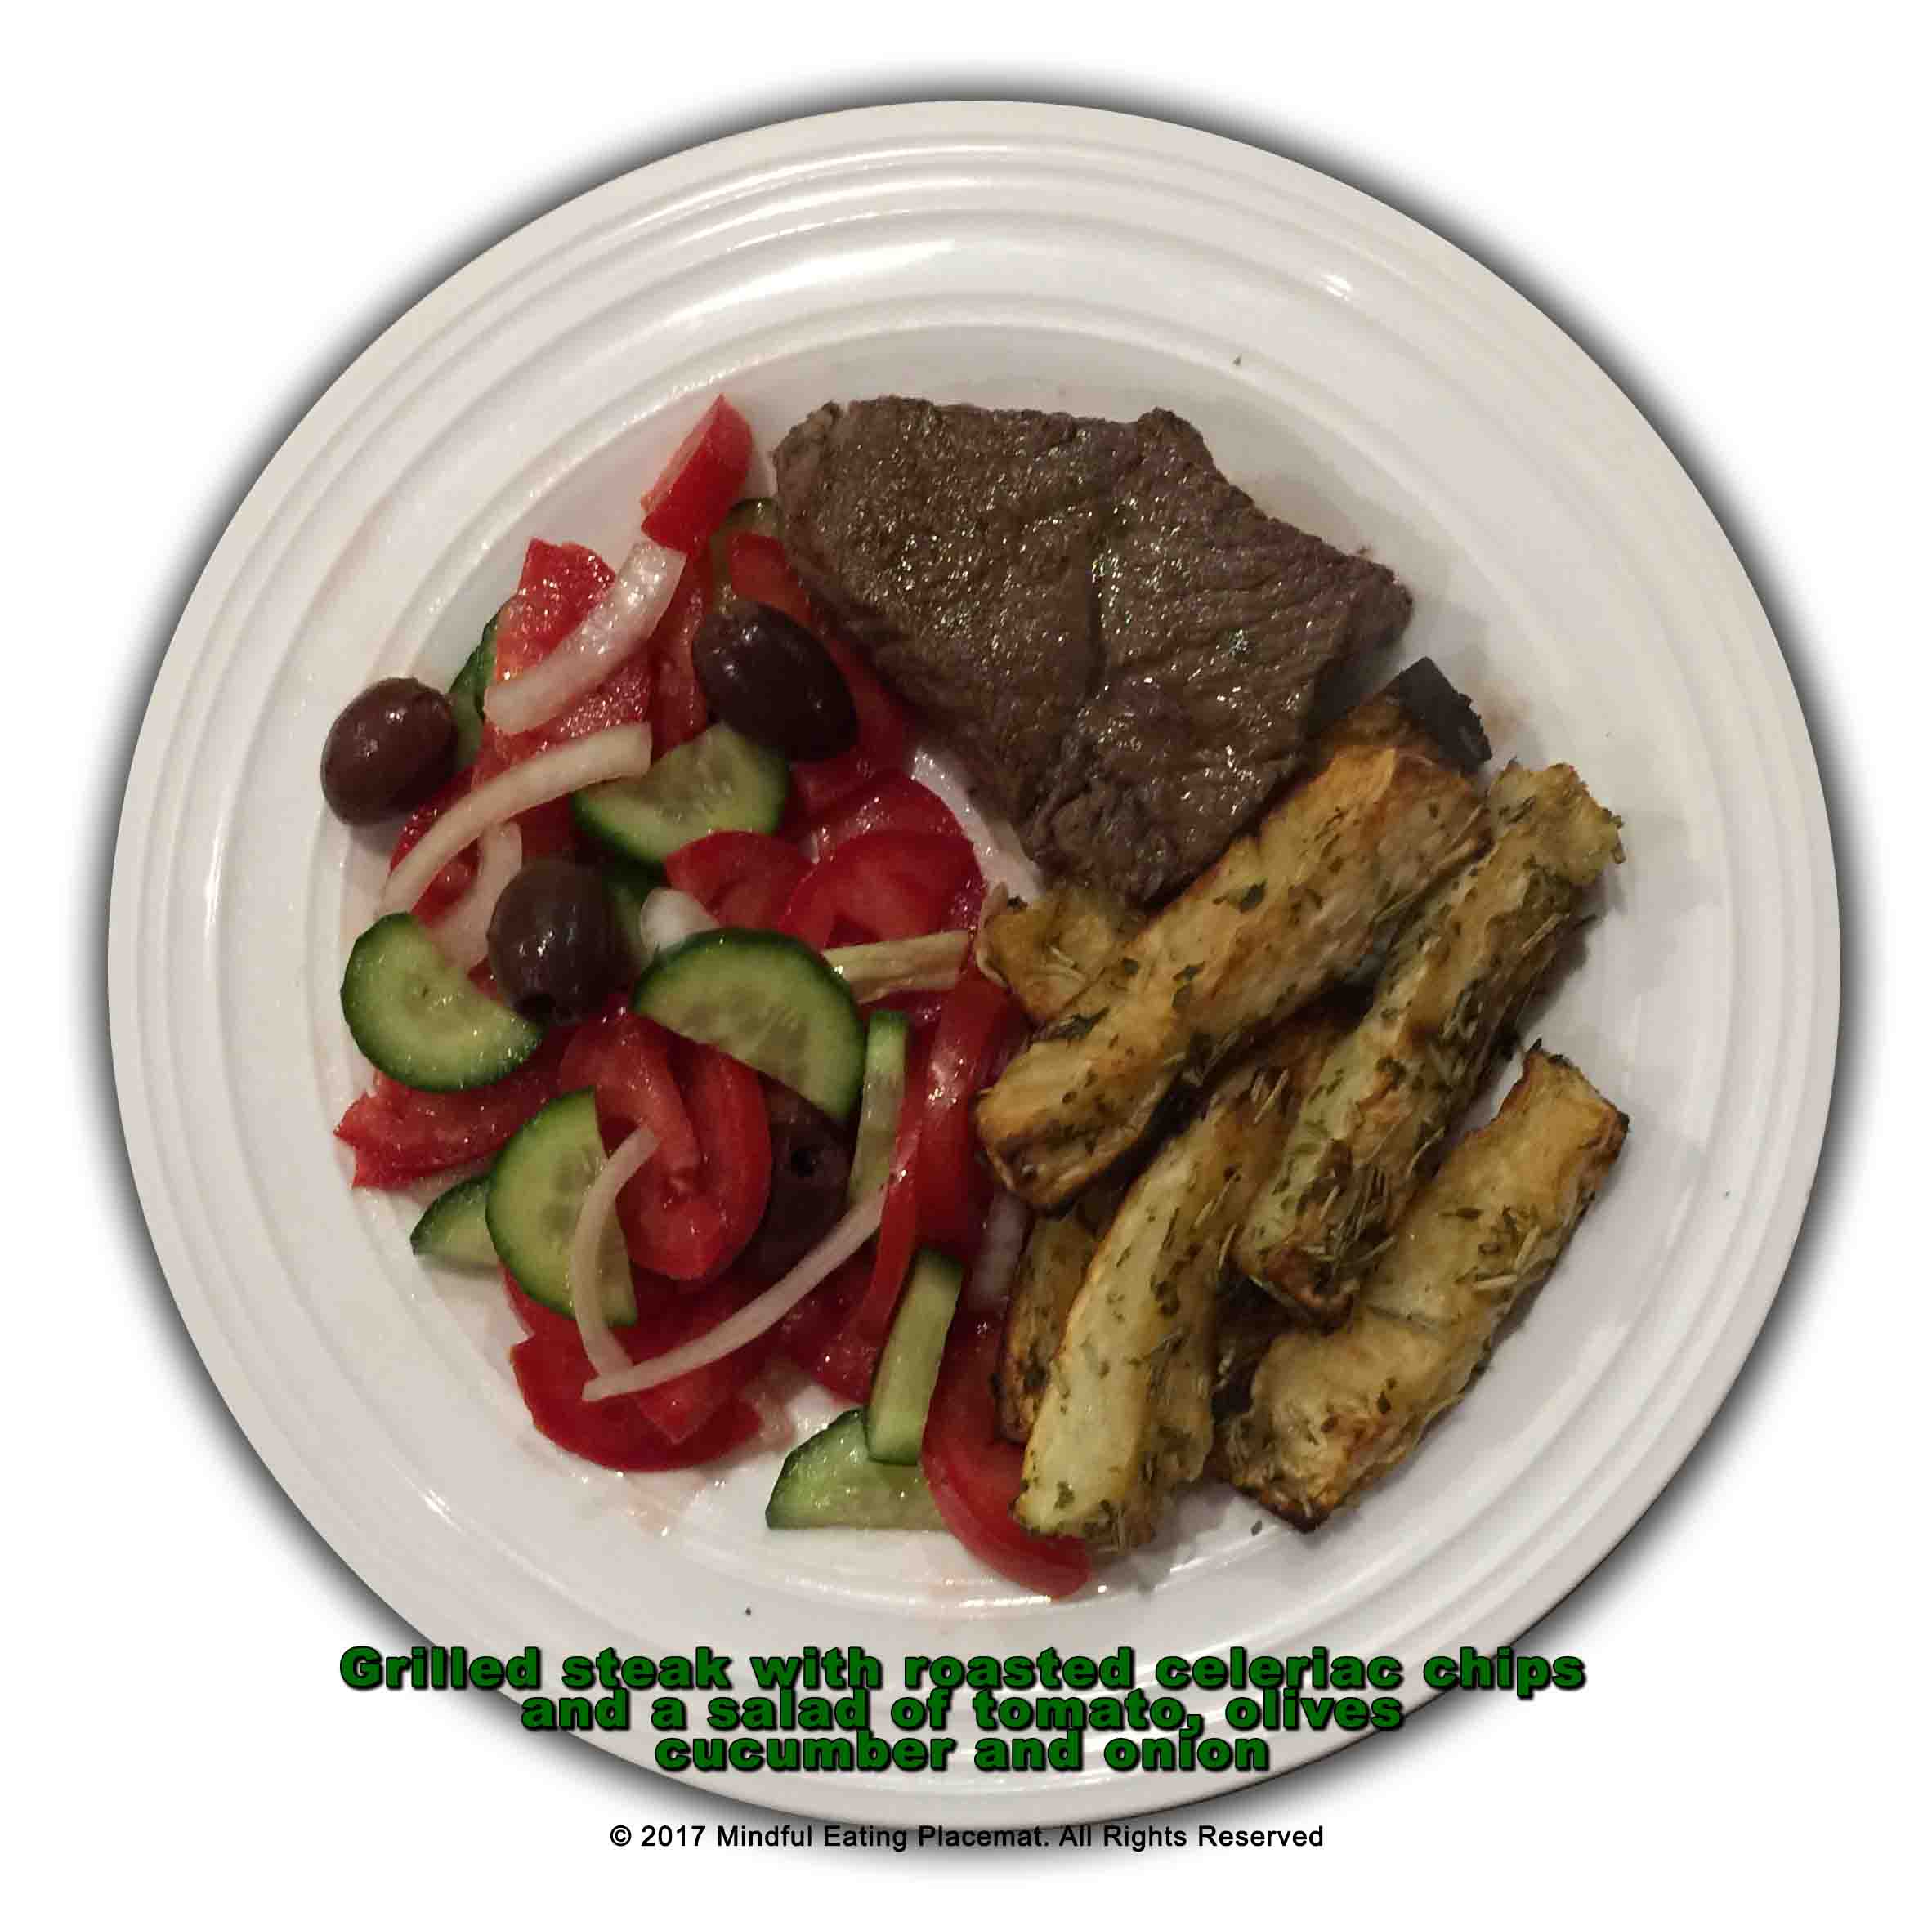 Steak with roasted rosemary celeriac chips and tomato, cucumber salad 